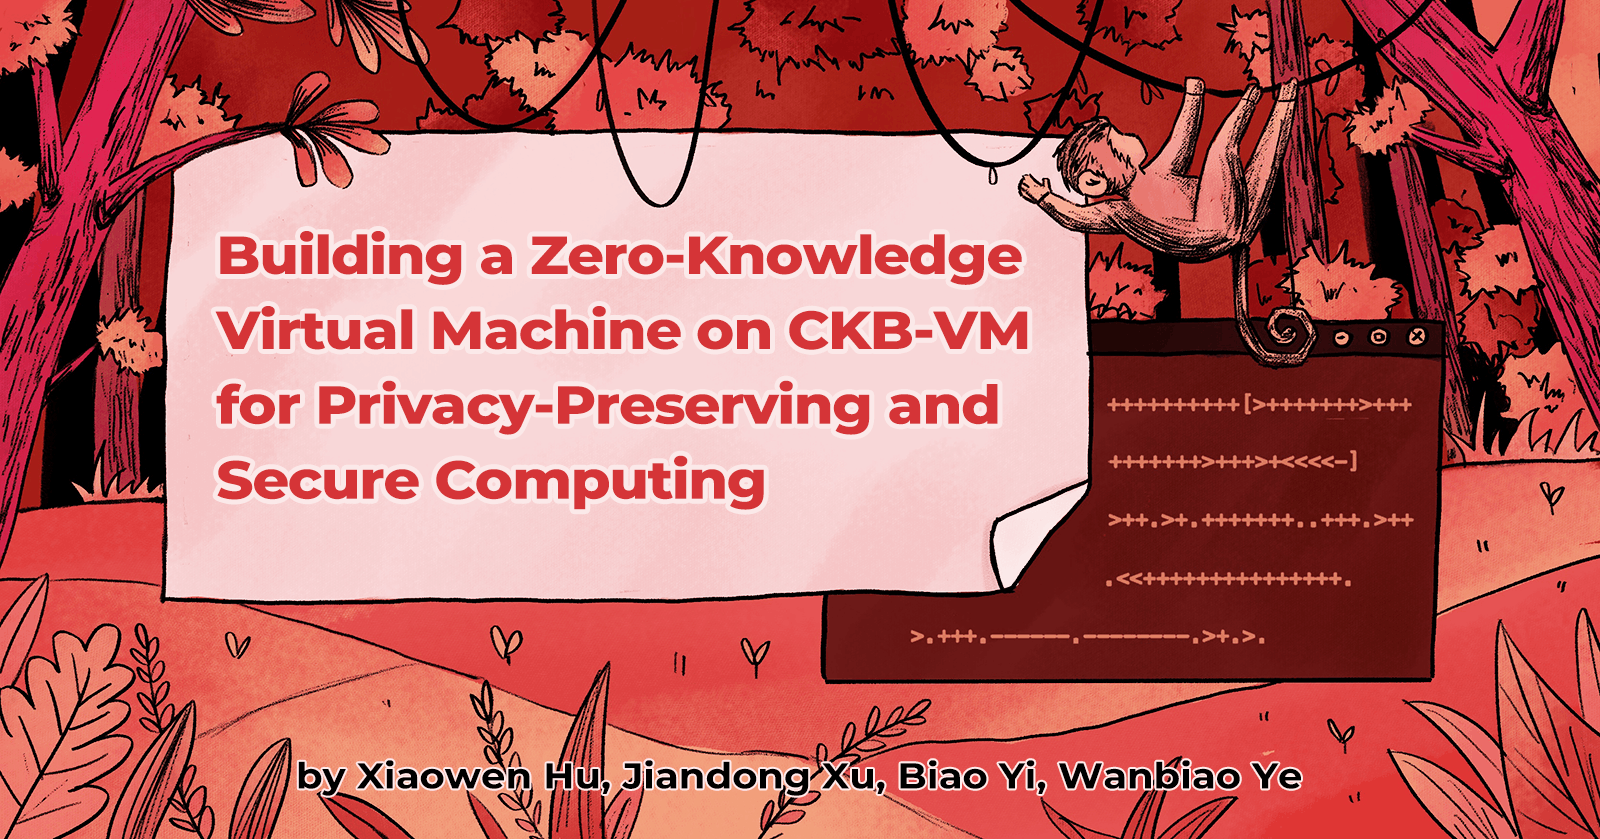 Building a Zero-Knowledge Virtual Machine on CKB-VM for Privacy-Preserving and Secure Computing